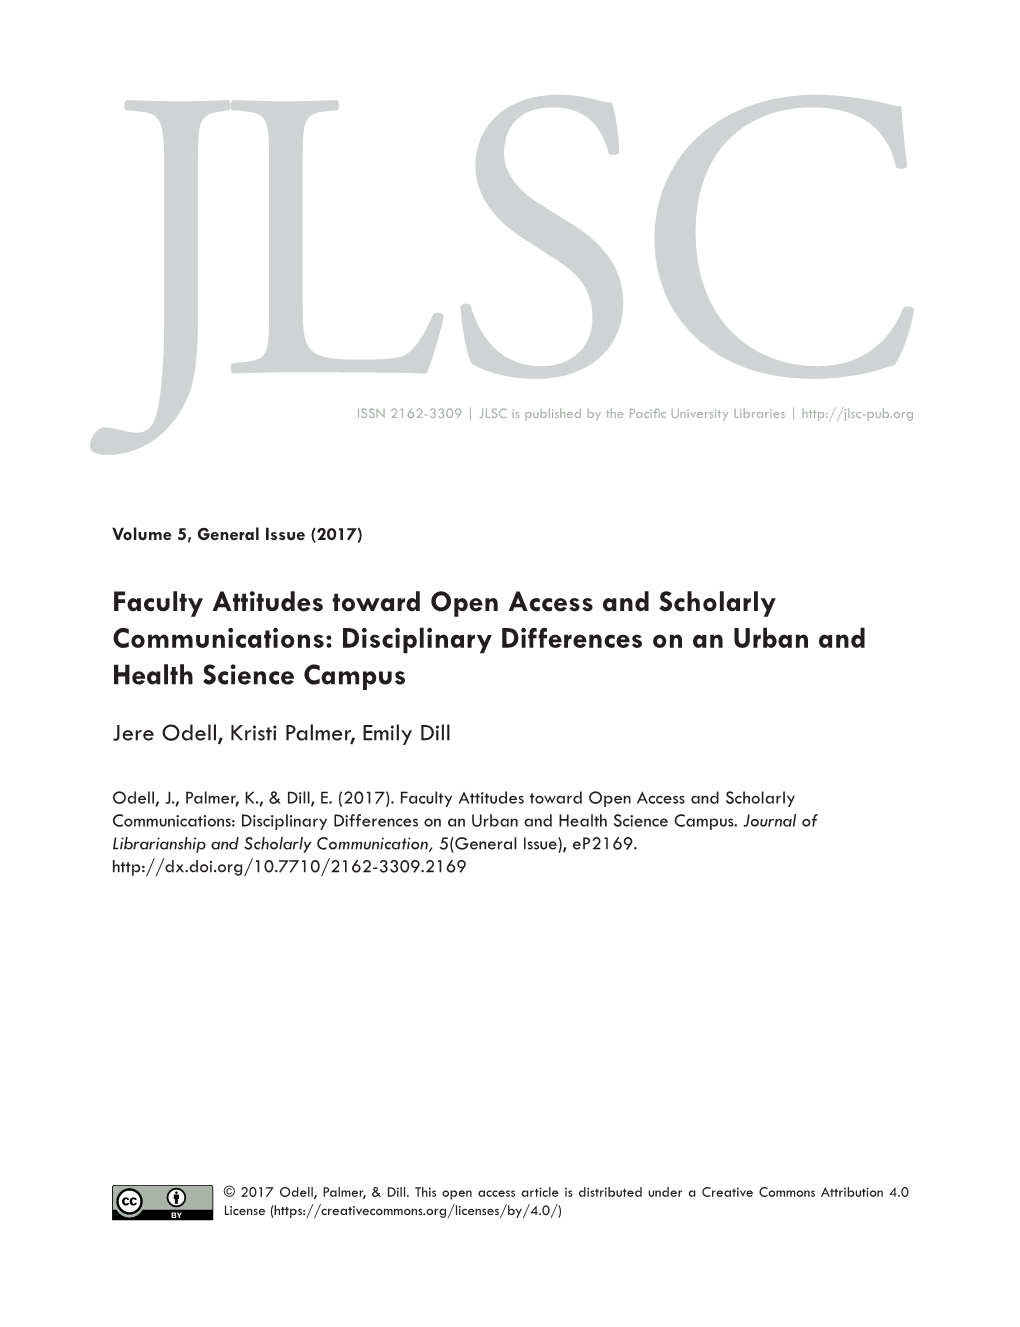 Faculty Attitudes Toward Open Access and Scholarly Communications: Disciplinary Differences on an Urban and Health Science Campus